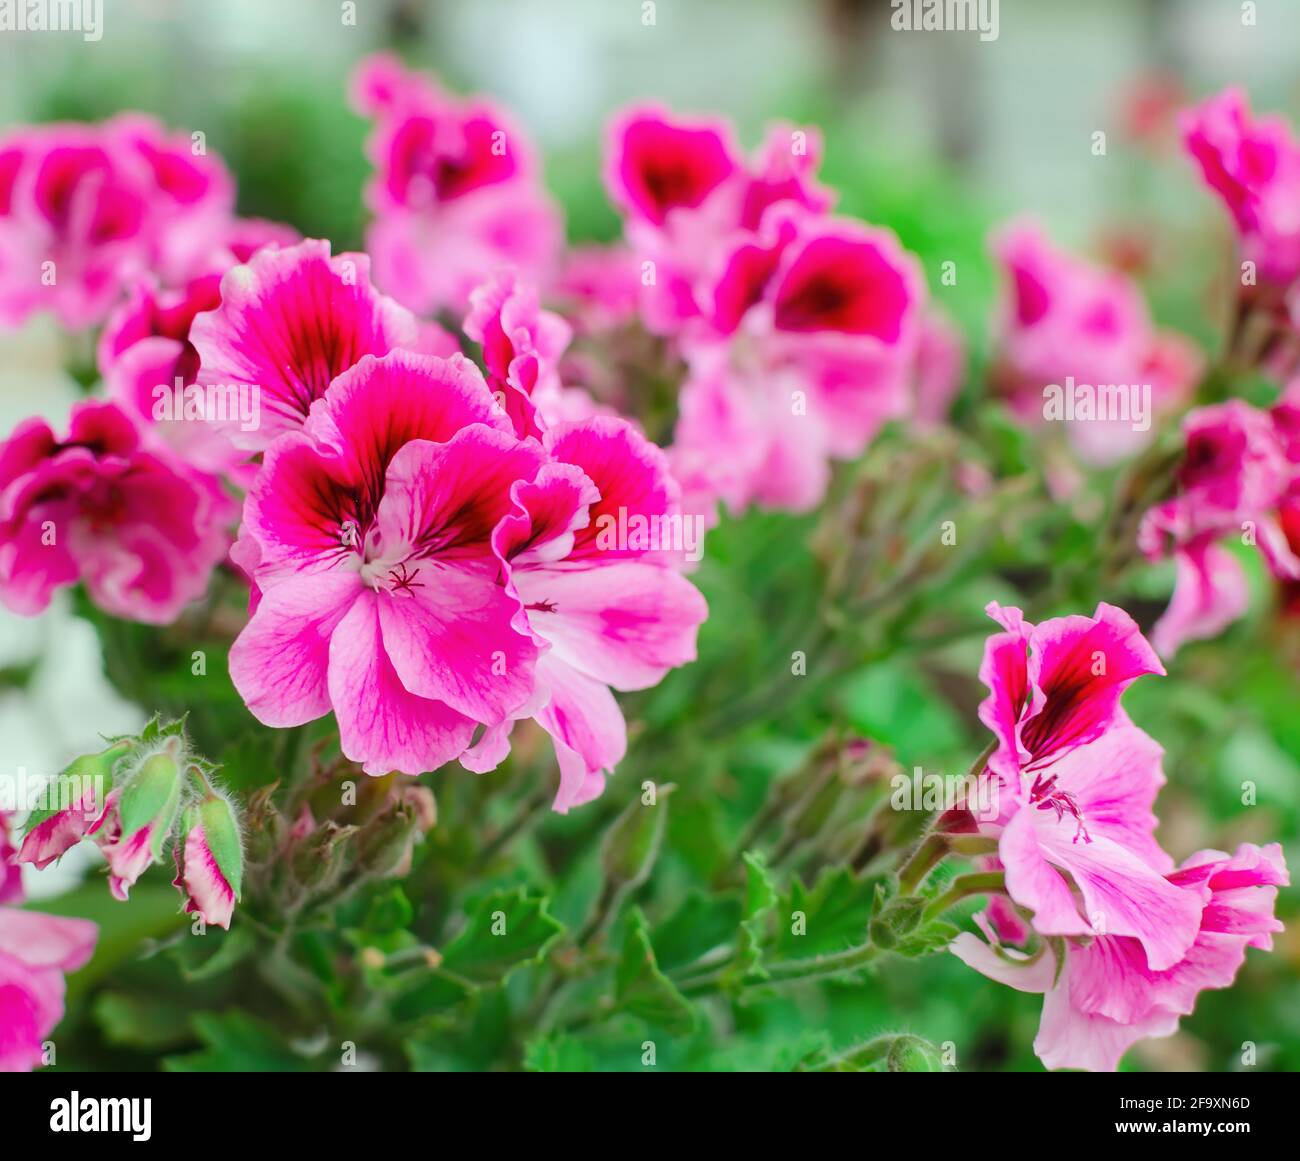 geranium blooming and close-up, beautiful group of pink flowers on a background of green leaves Stock Photo